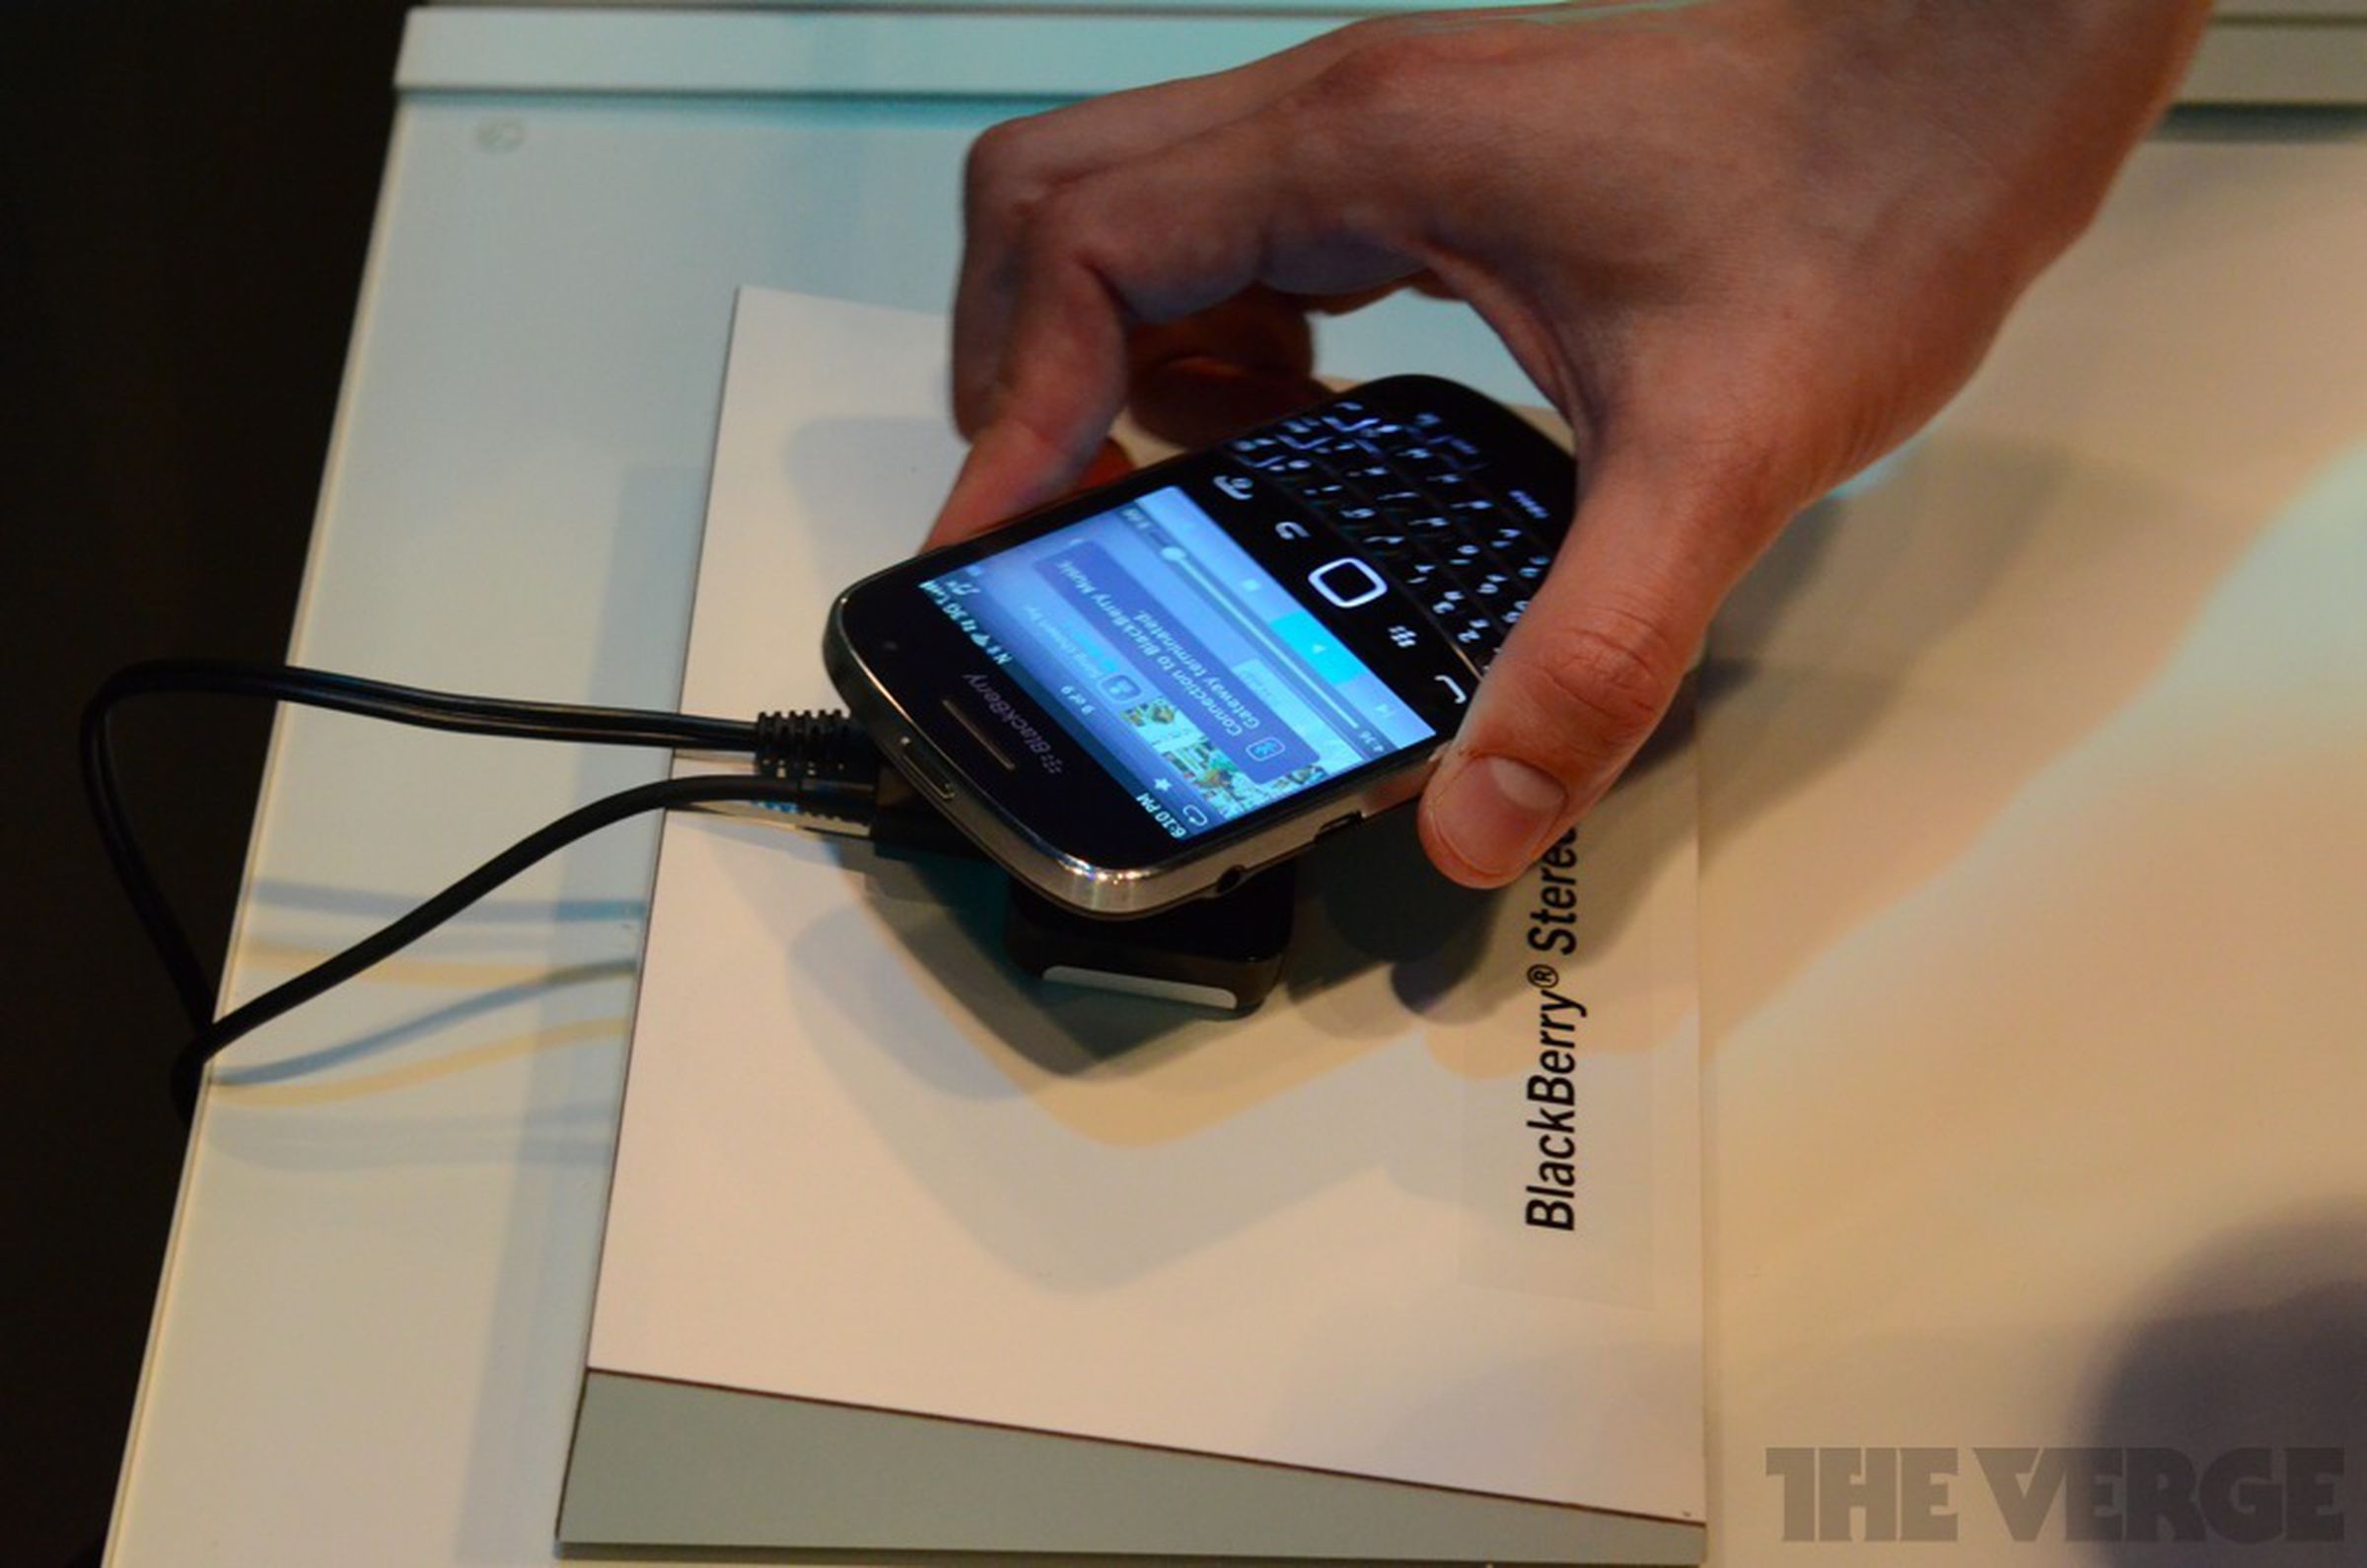 BlackBerry Music Gateway hands-on pictures